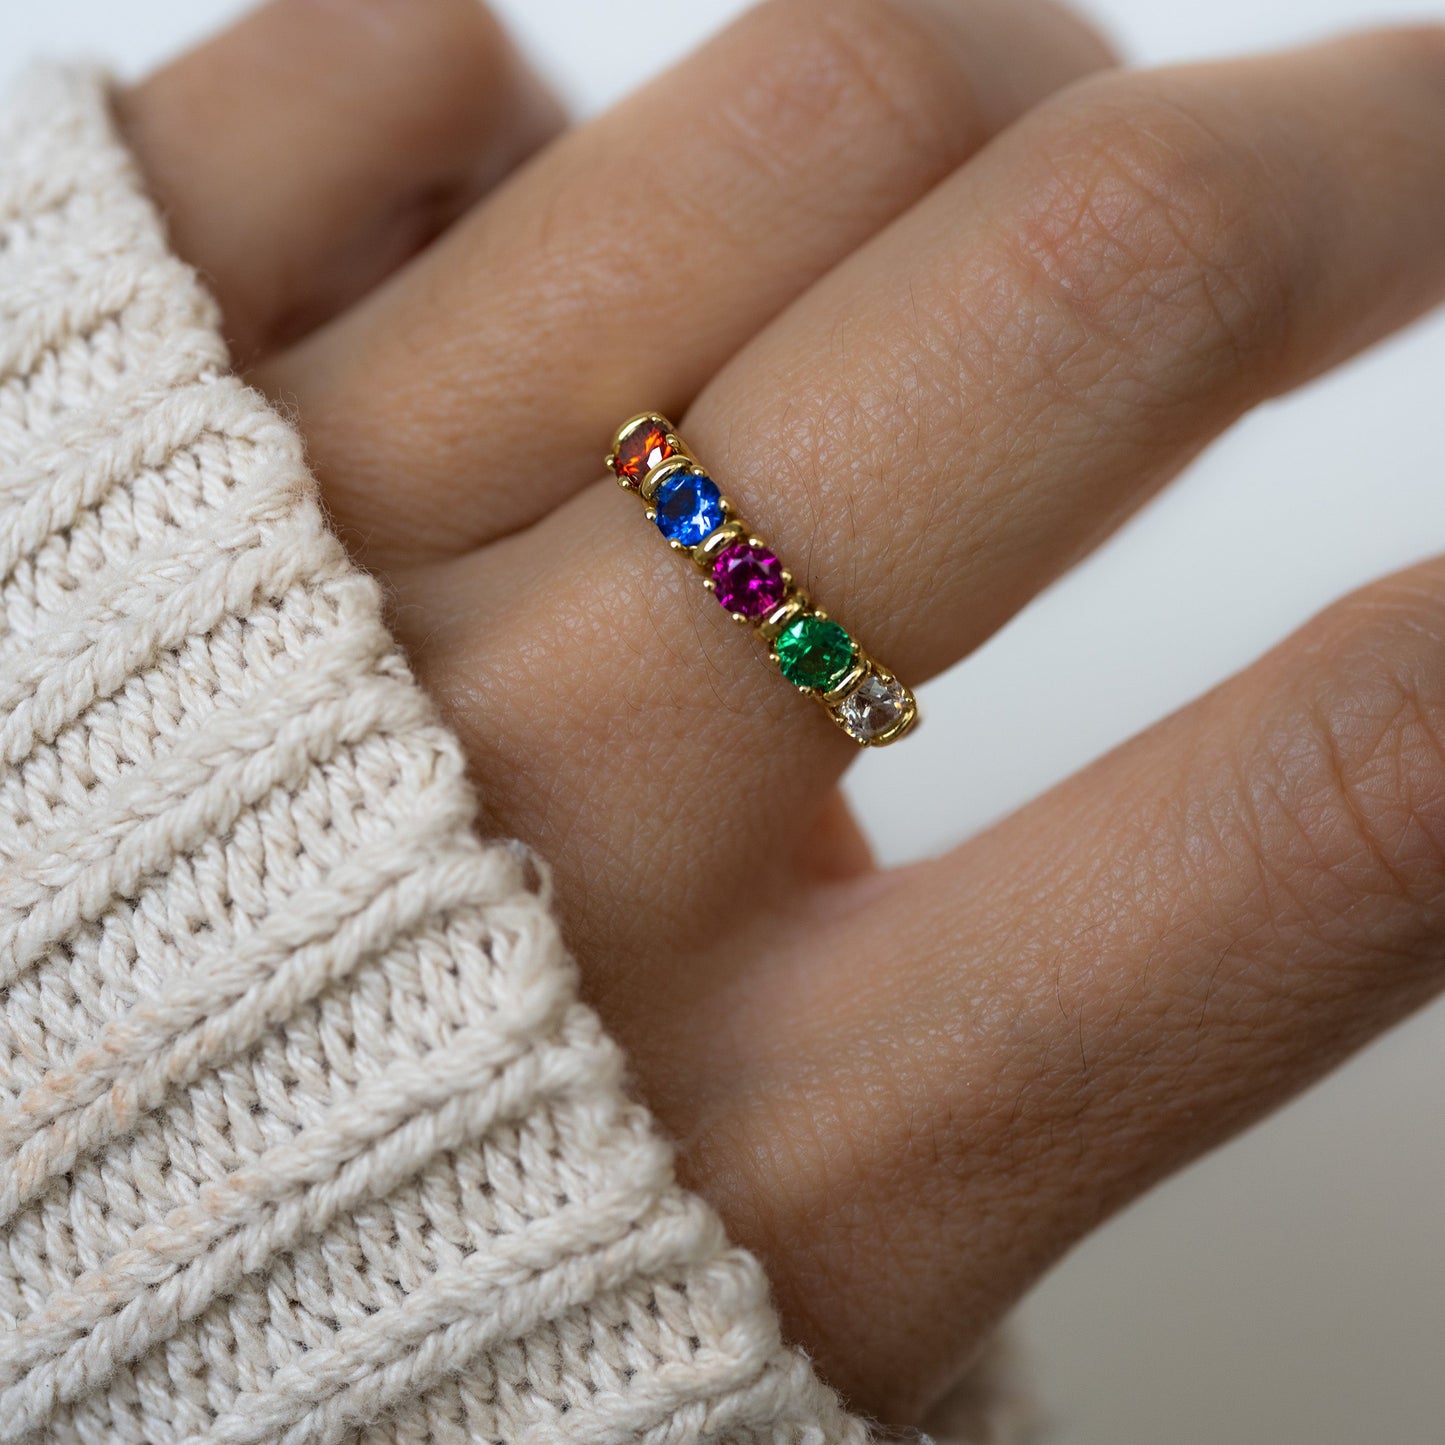 personalized birthstone ring with 5 stones